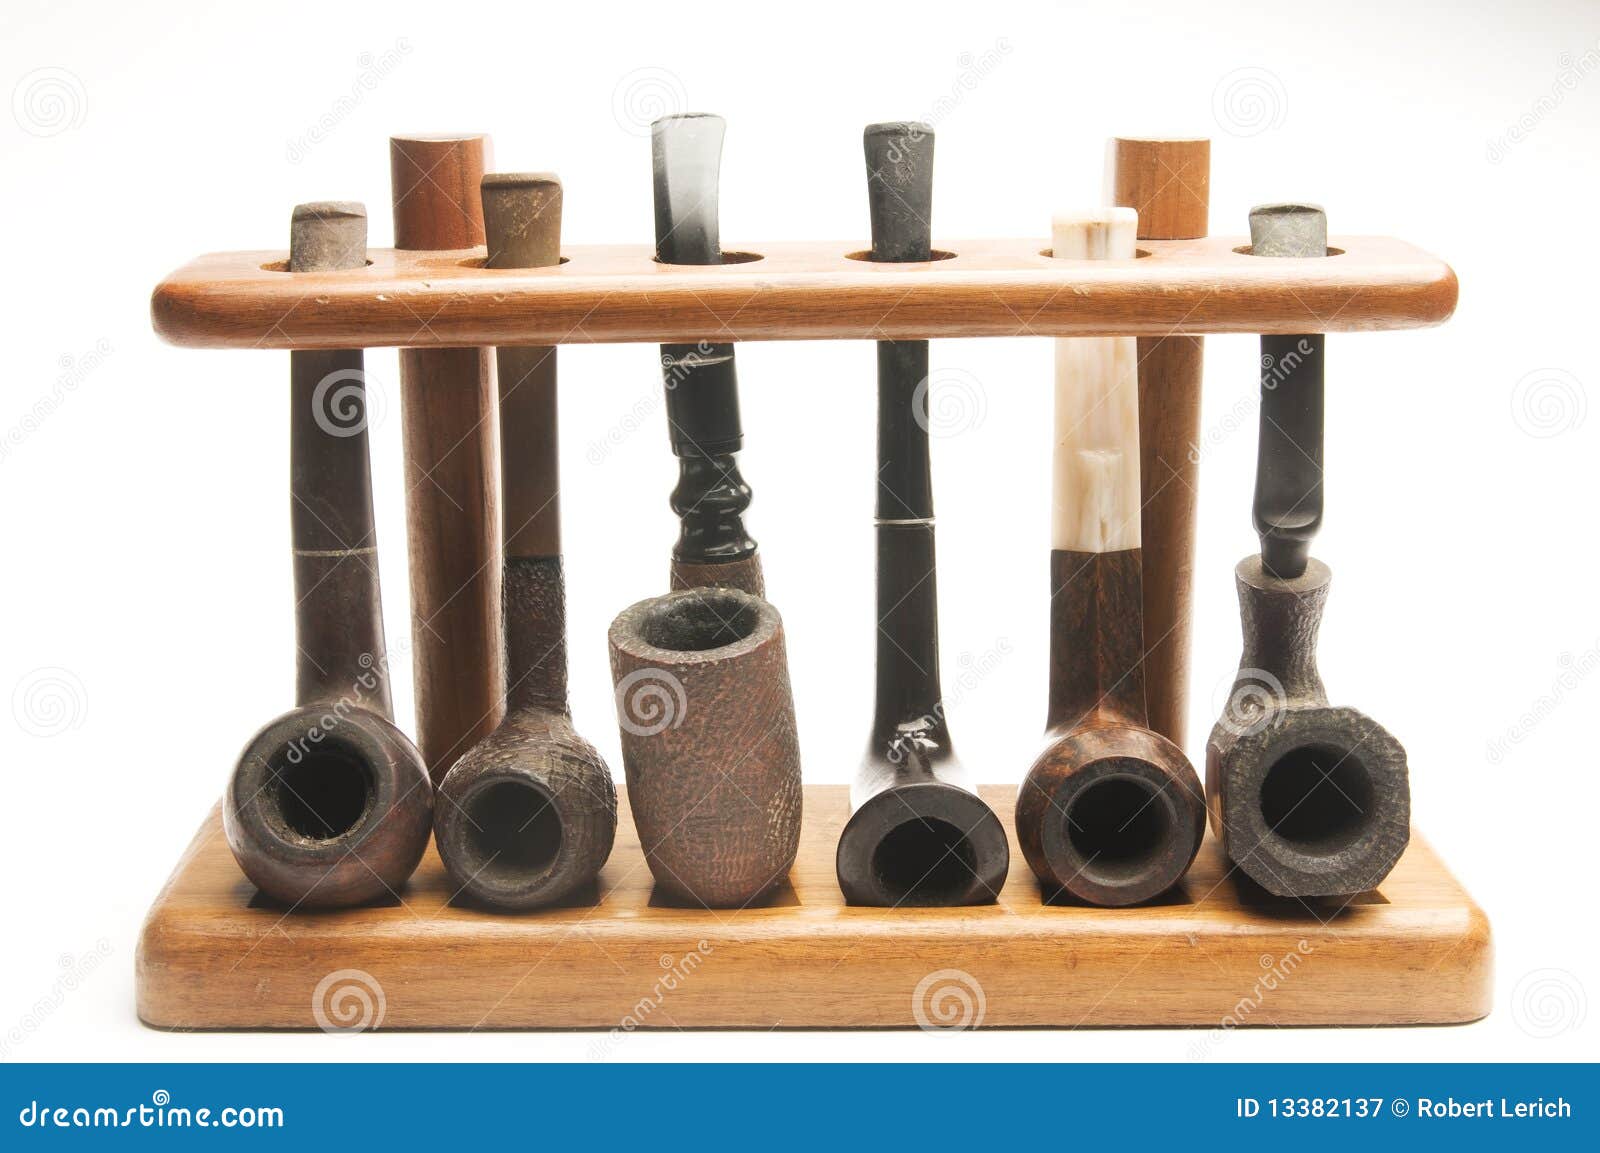 Pipe Collection In Wood Pipe Rack Stock Image Image Of Ceramic